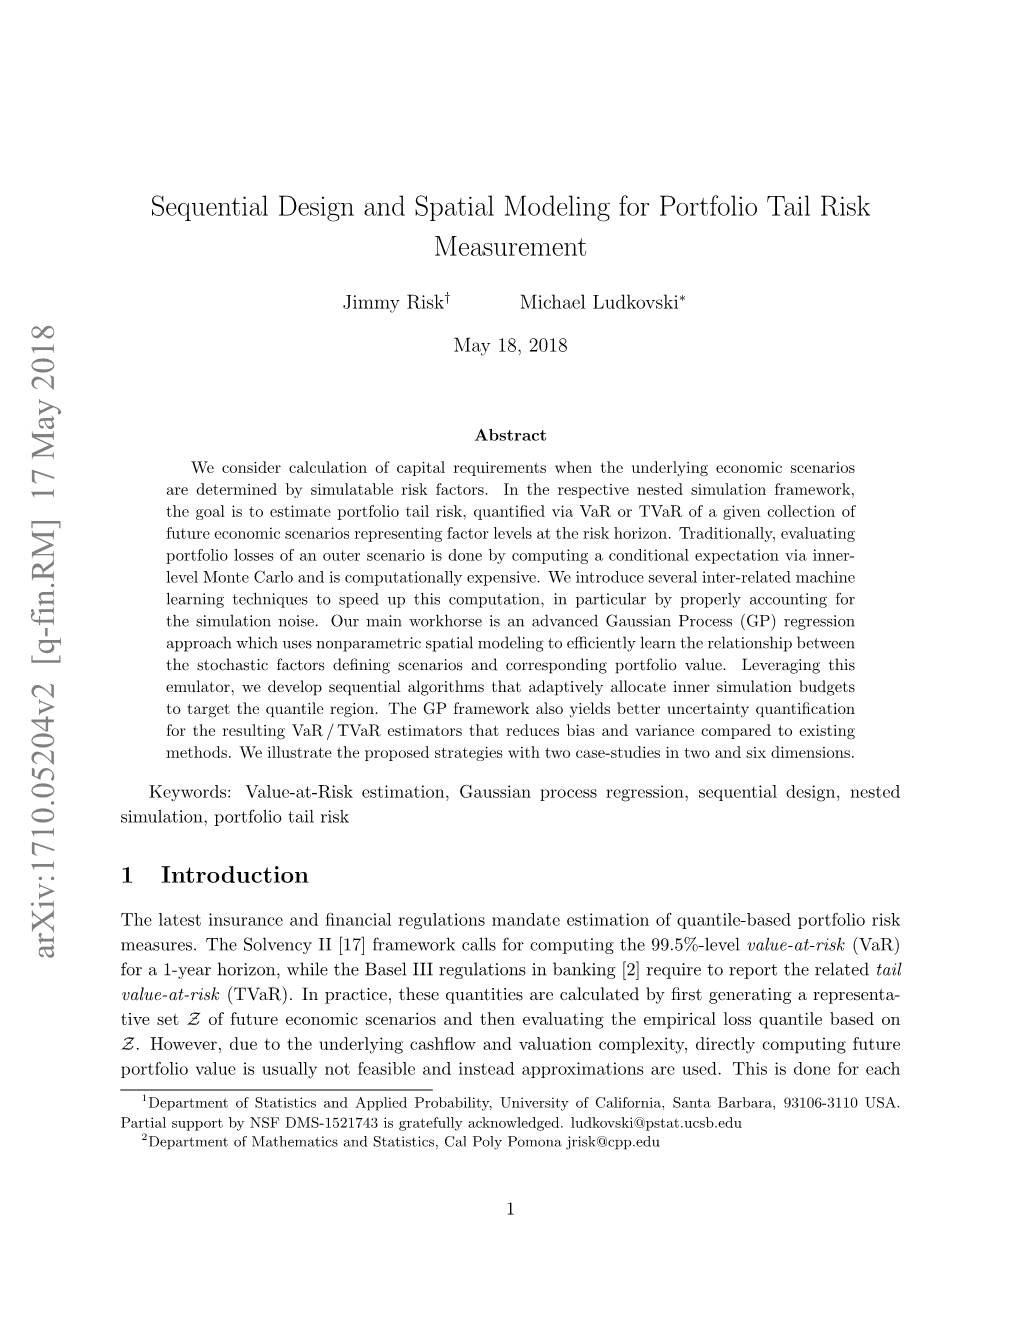 Sequential Design and Spatial Modeling for Portfolio Tail Risk Measurement